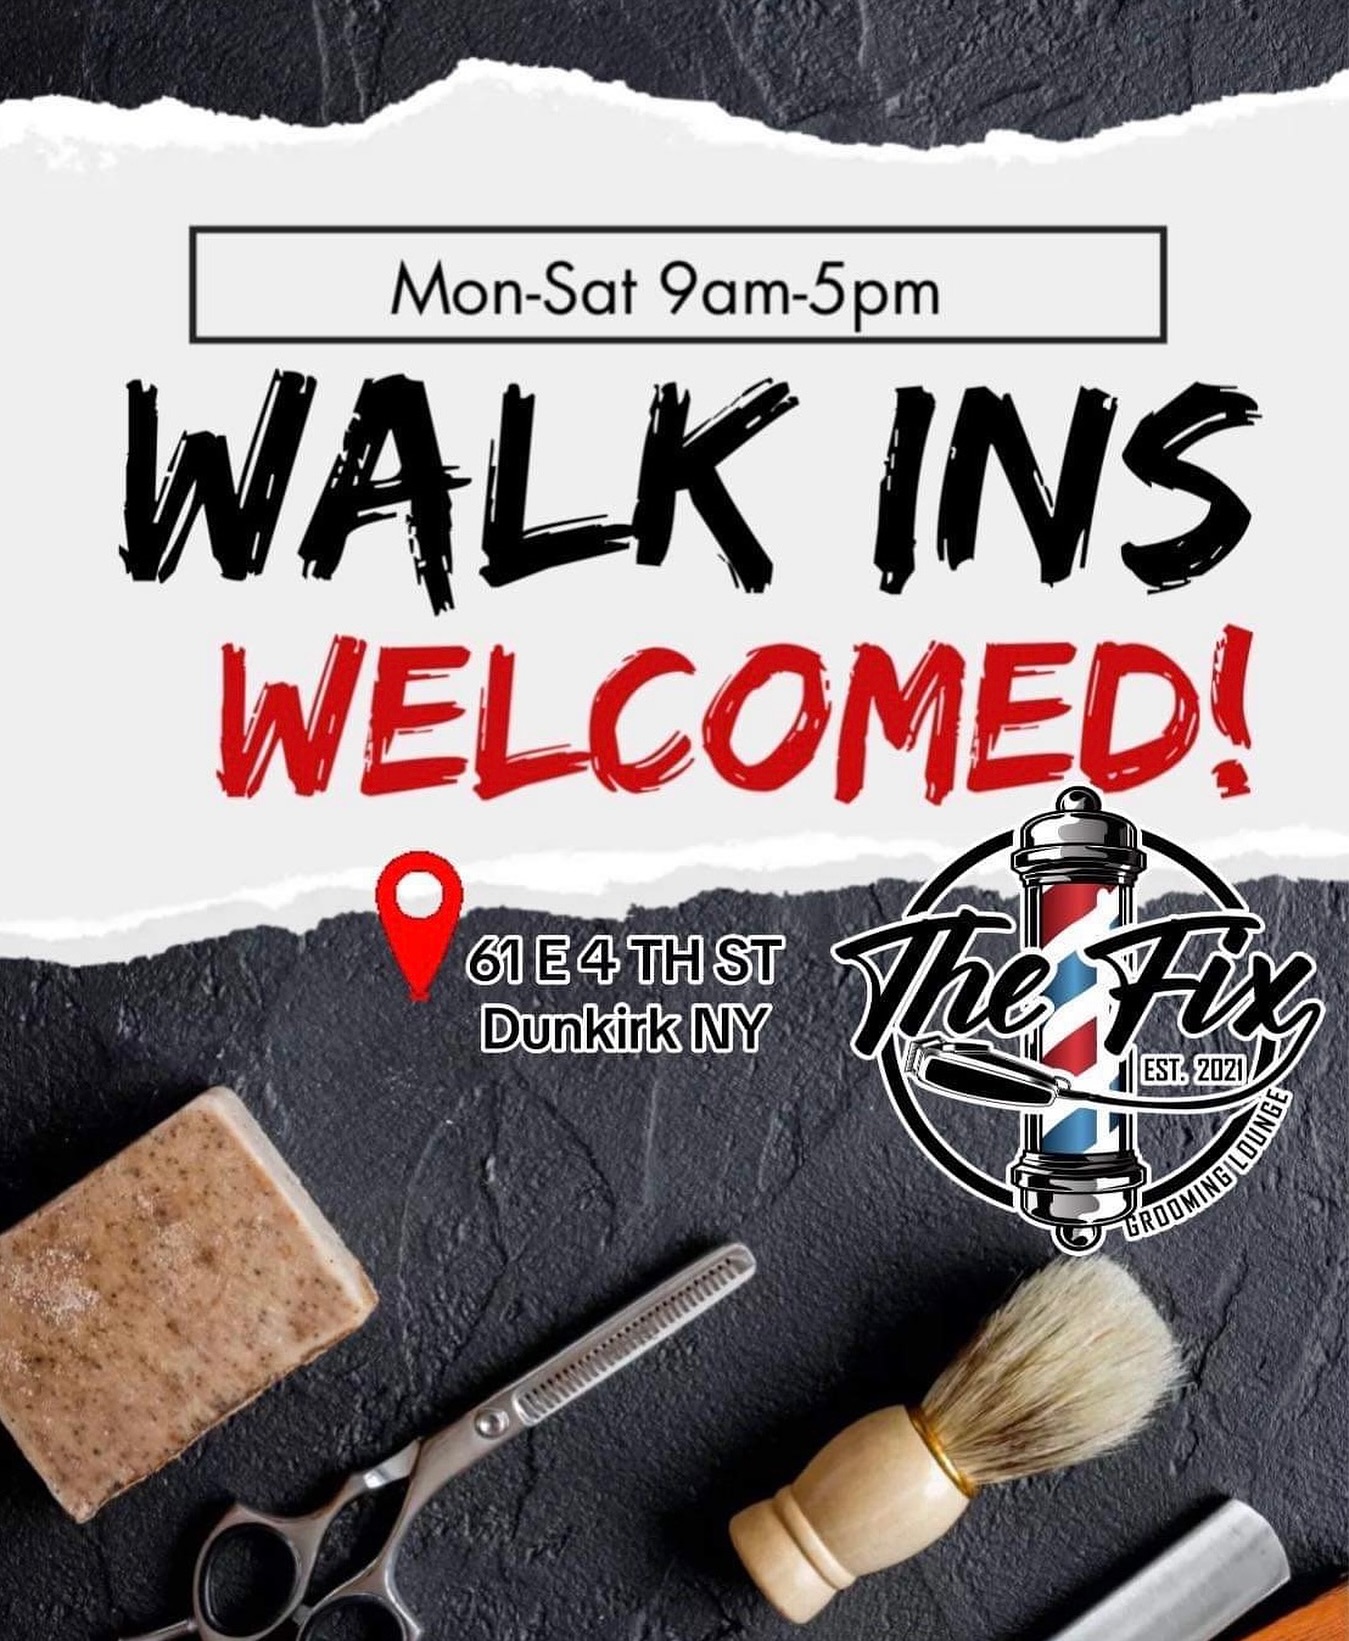 The Fix Grooming Lounge 61 E 4th St, Dunkirk New York 14048